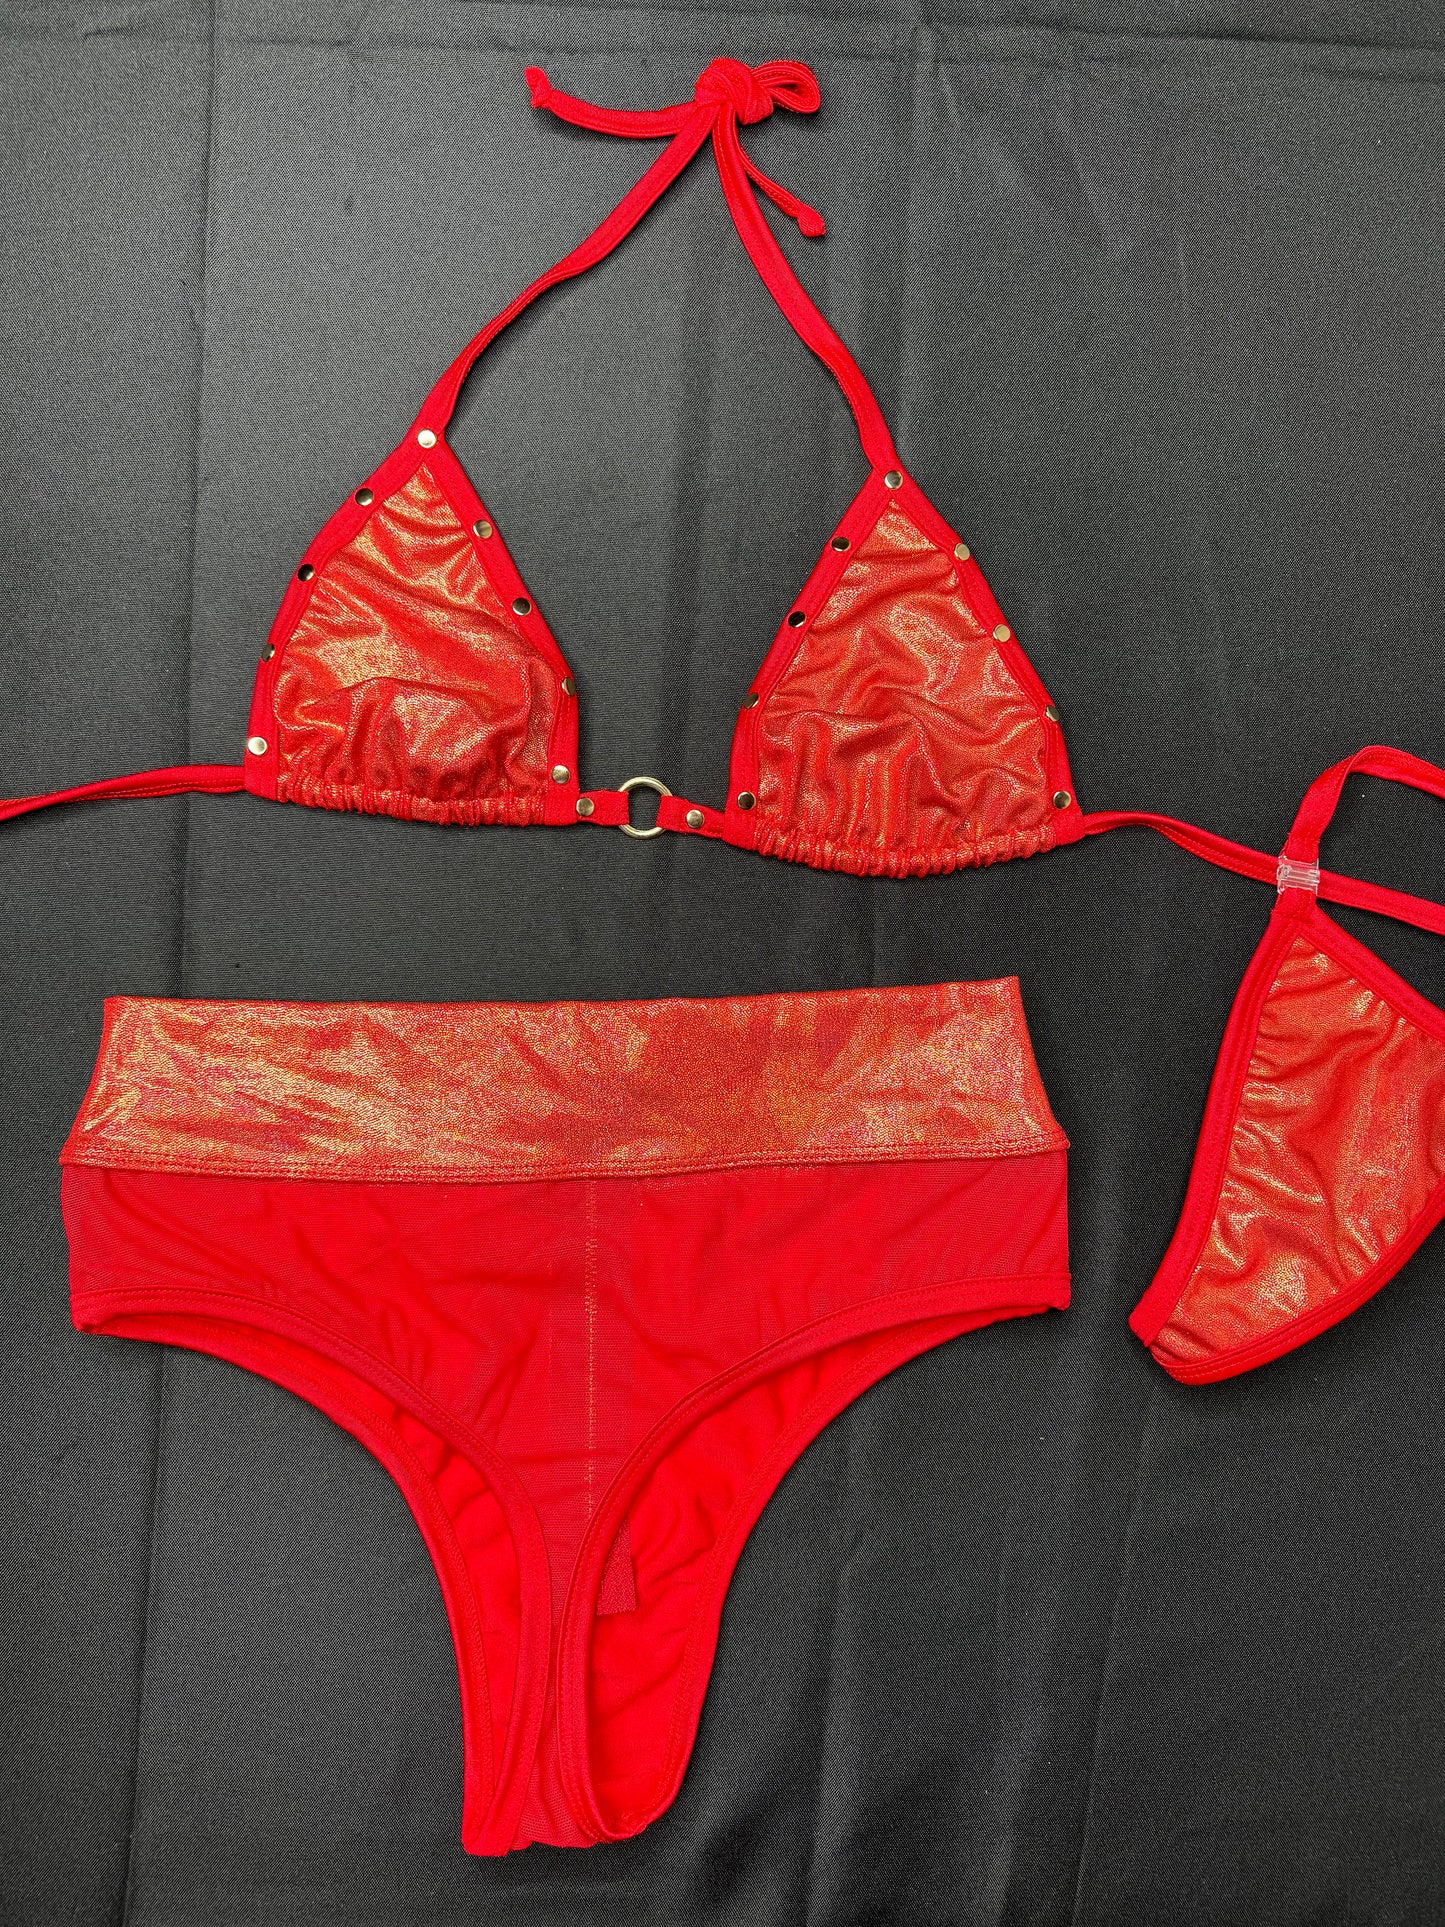 Metallic Red Two-Piece Exotic Dancer Outfit